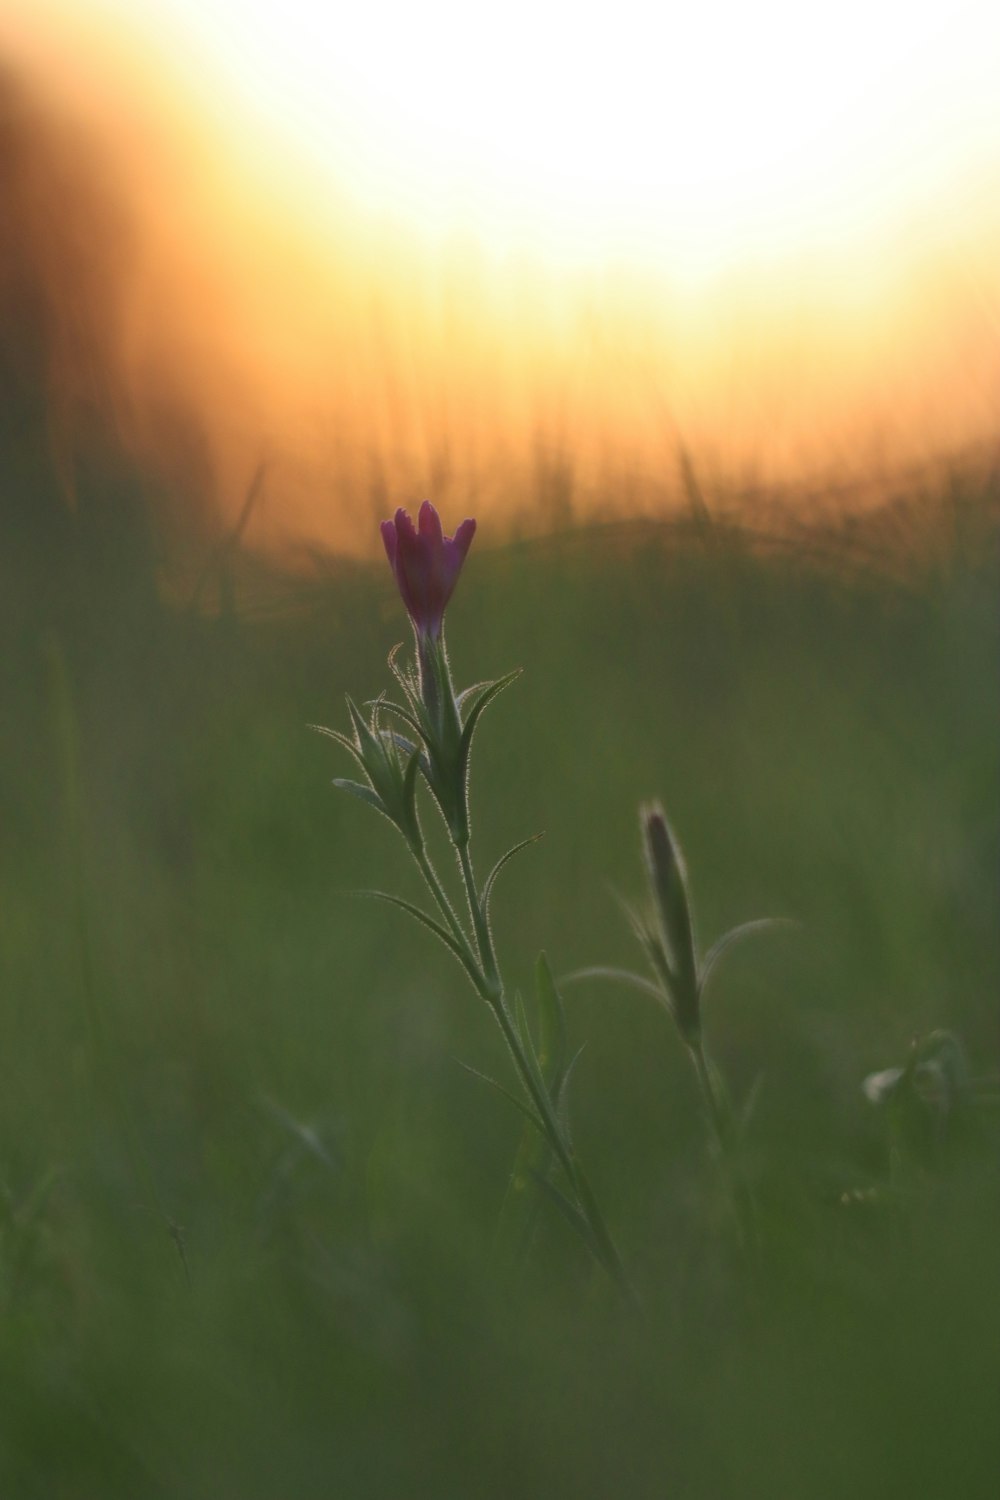 red flower in green grass field during sunset